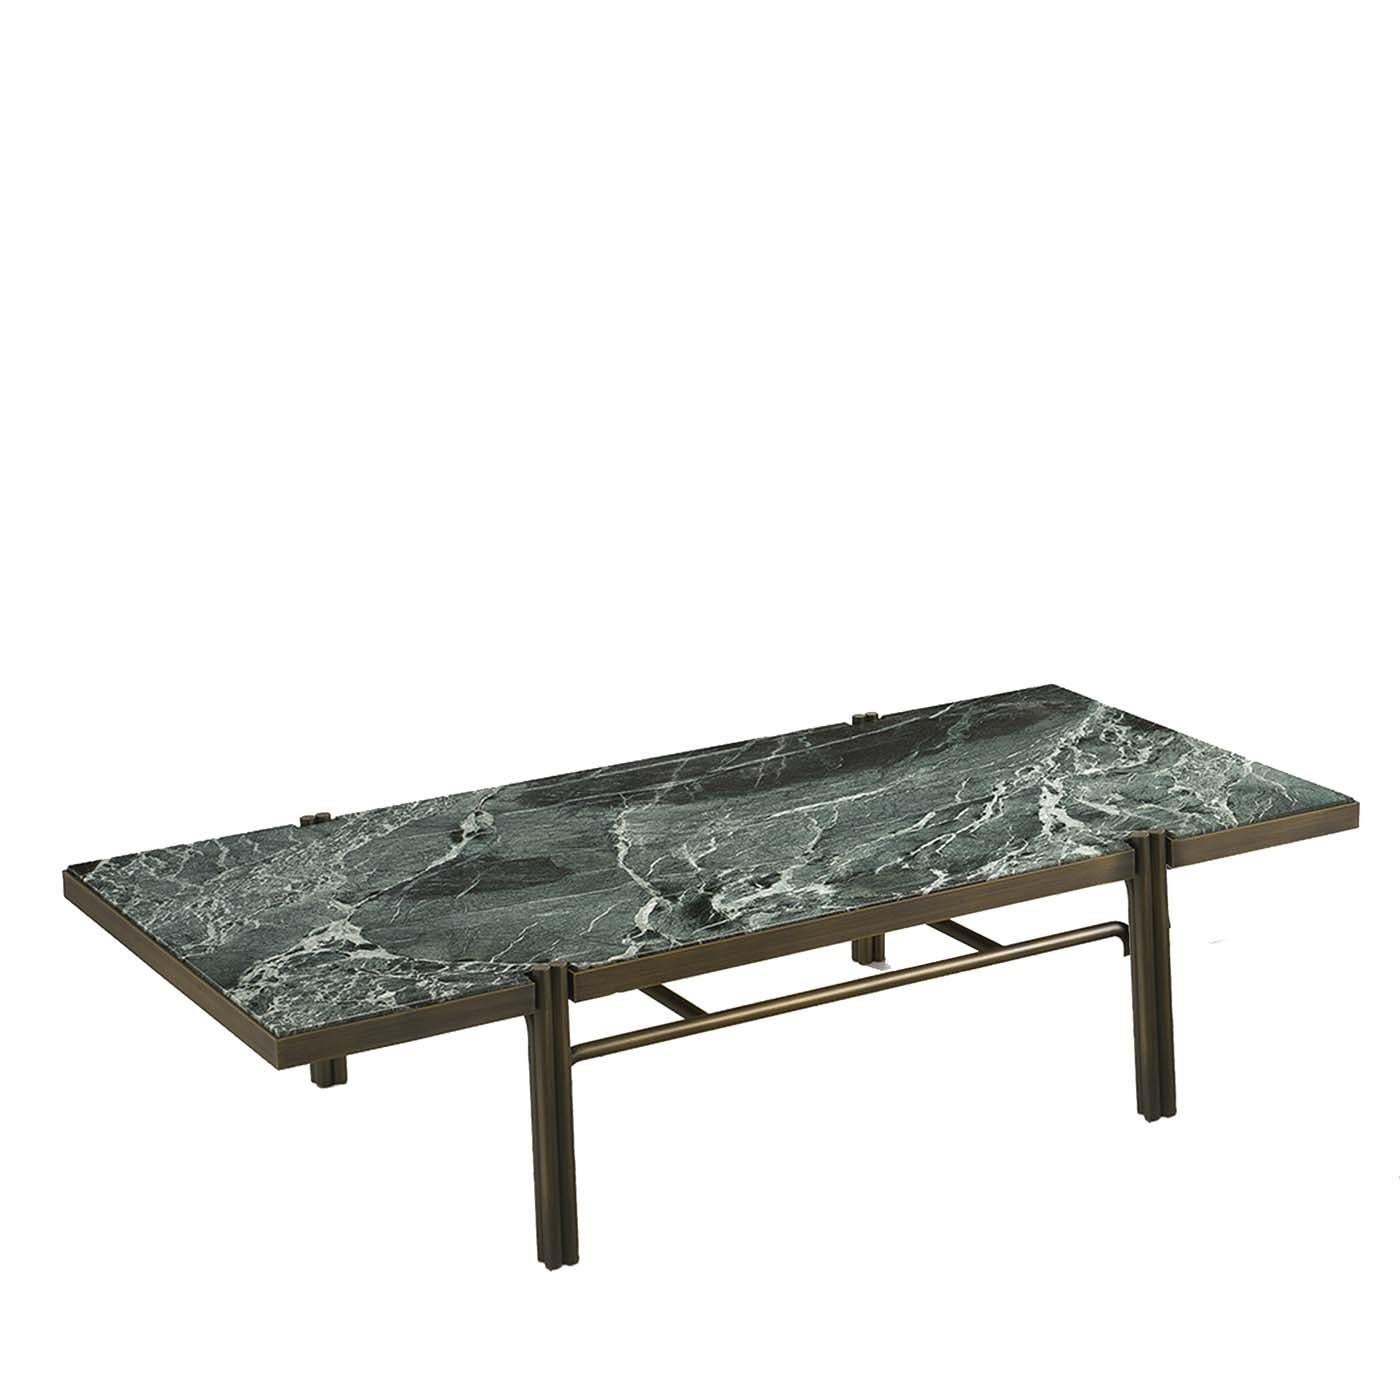 Part of a two-piece series, this coffee table is modern and sophisticated. Its rectangular top in Green St. Denis marble (2 cm thick) is mounted on a frame in metal with a black finish. This frame and the lustrous finish are also present in the